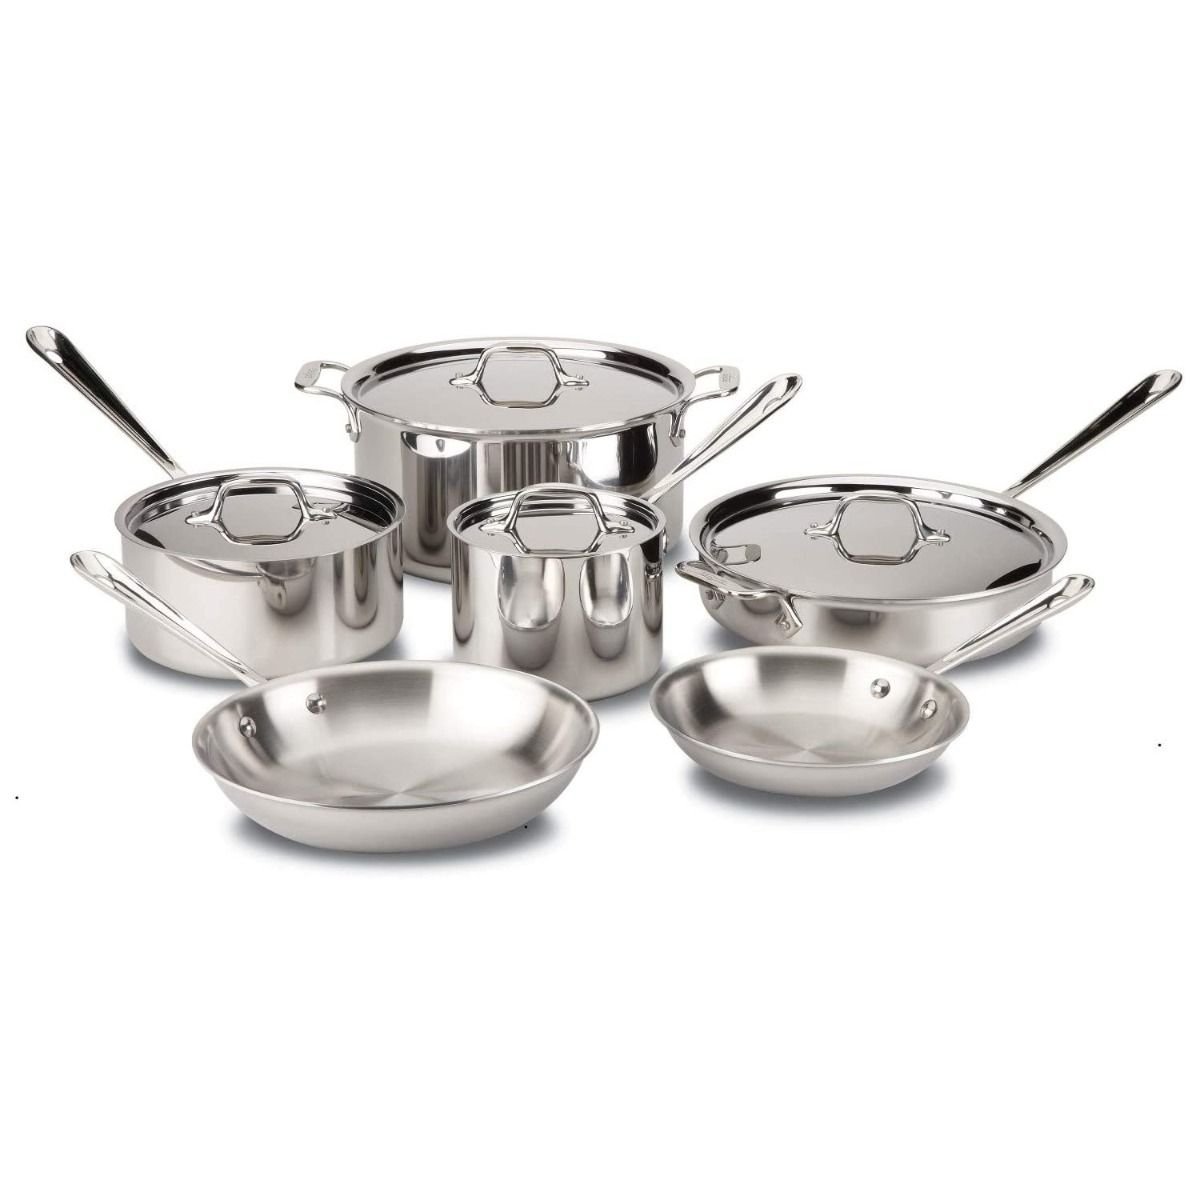 All-Clad D3 Stainless Steel Cookware Set | 10-Piece